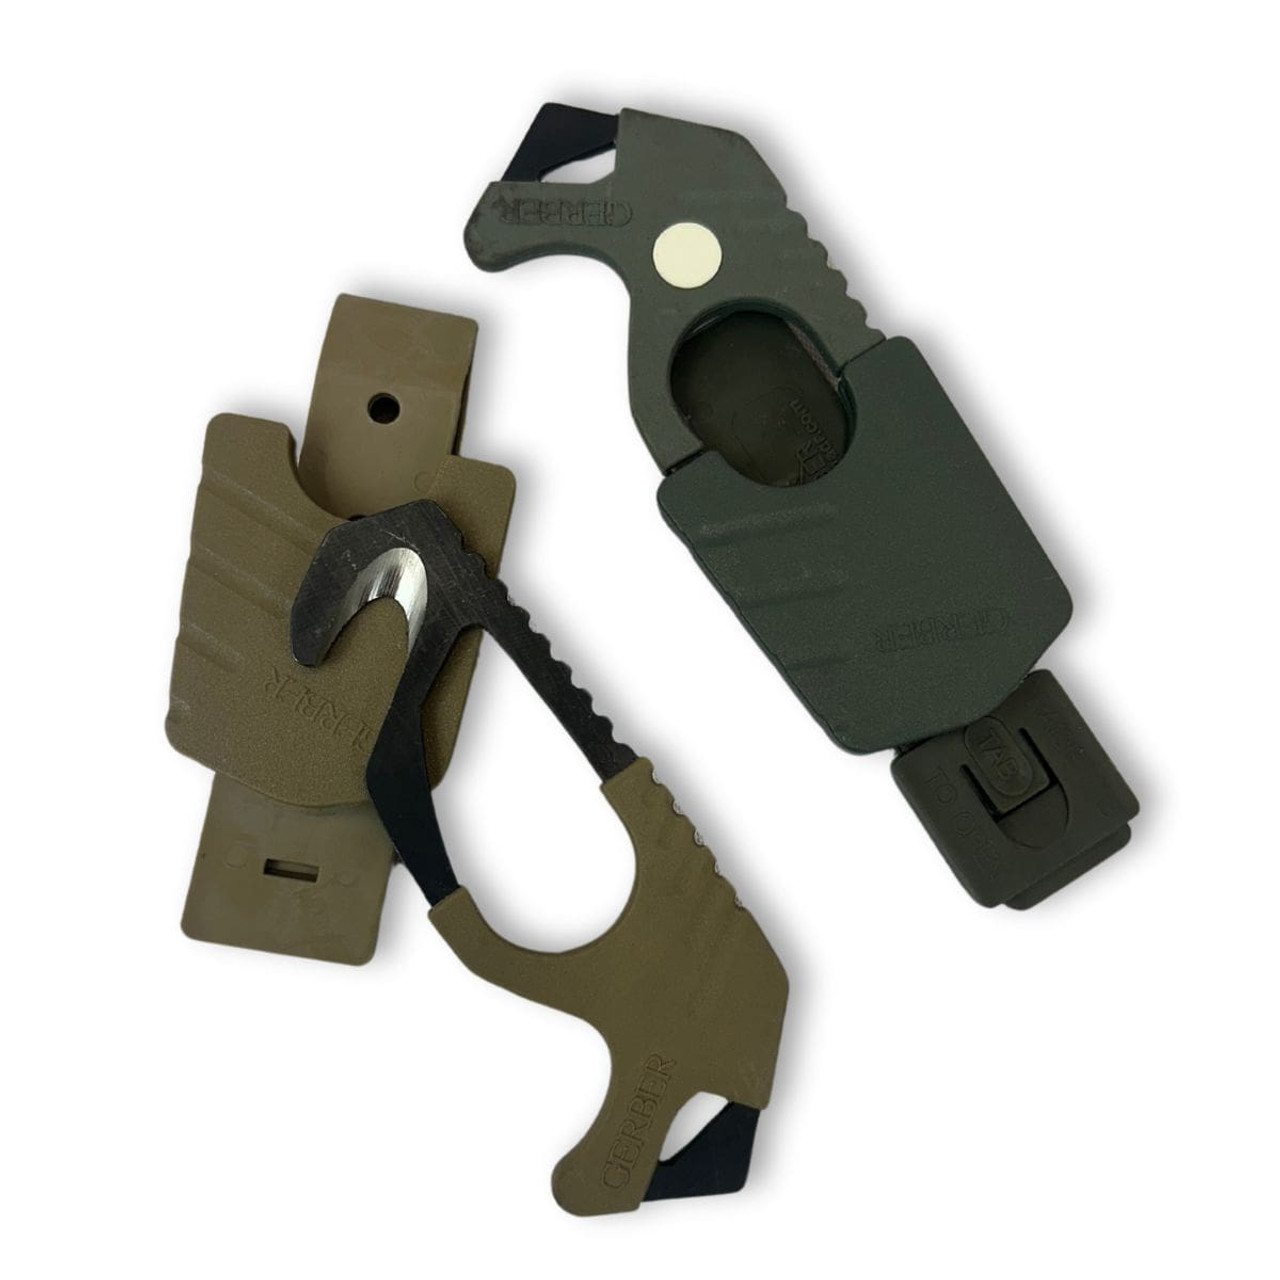 https://cdn11.bigcommerce.com/s-53r83b14/images/stencil/1280x1280/products/24313/121051/Gerber_Strap_Rope_Cutter_Used-min__90783.1709303137.jpg?c=2